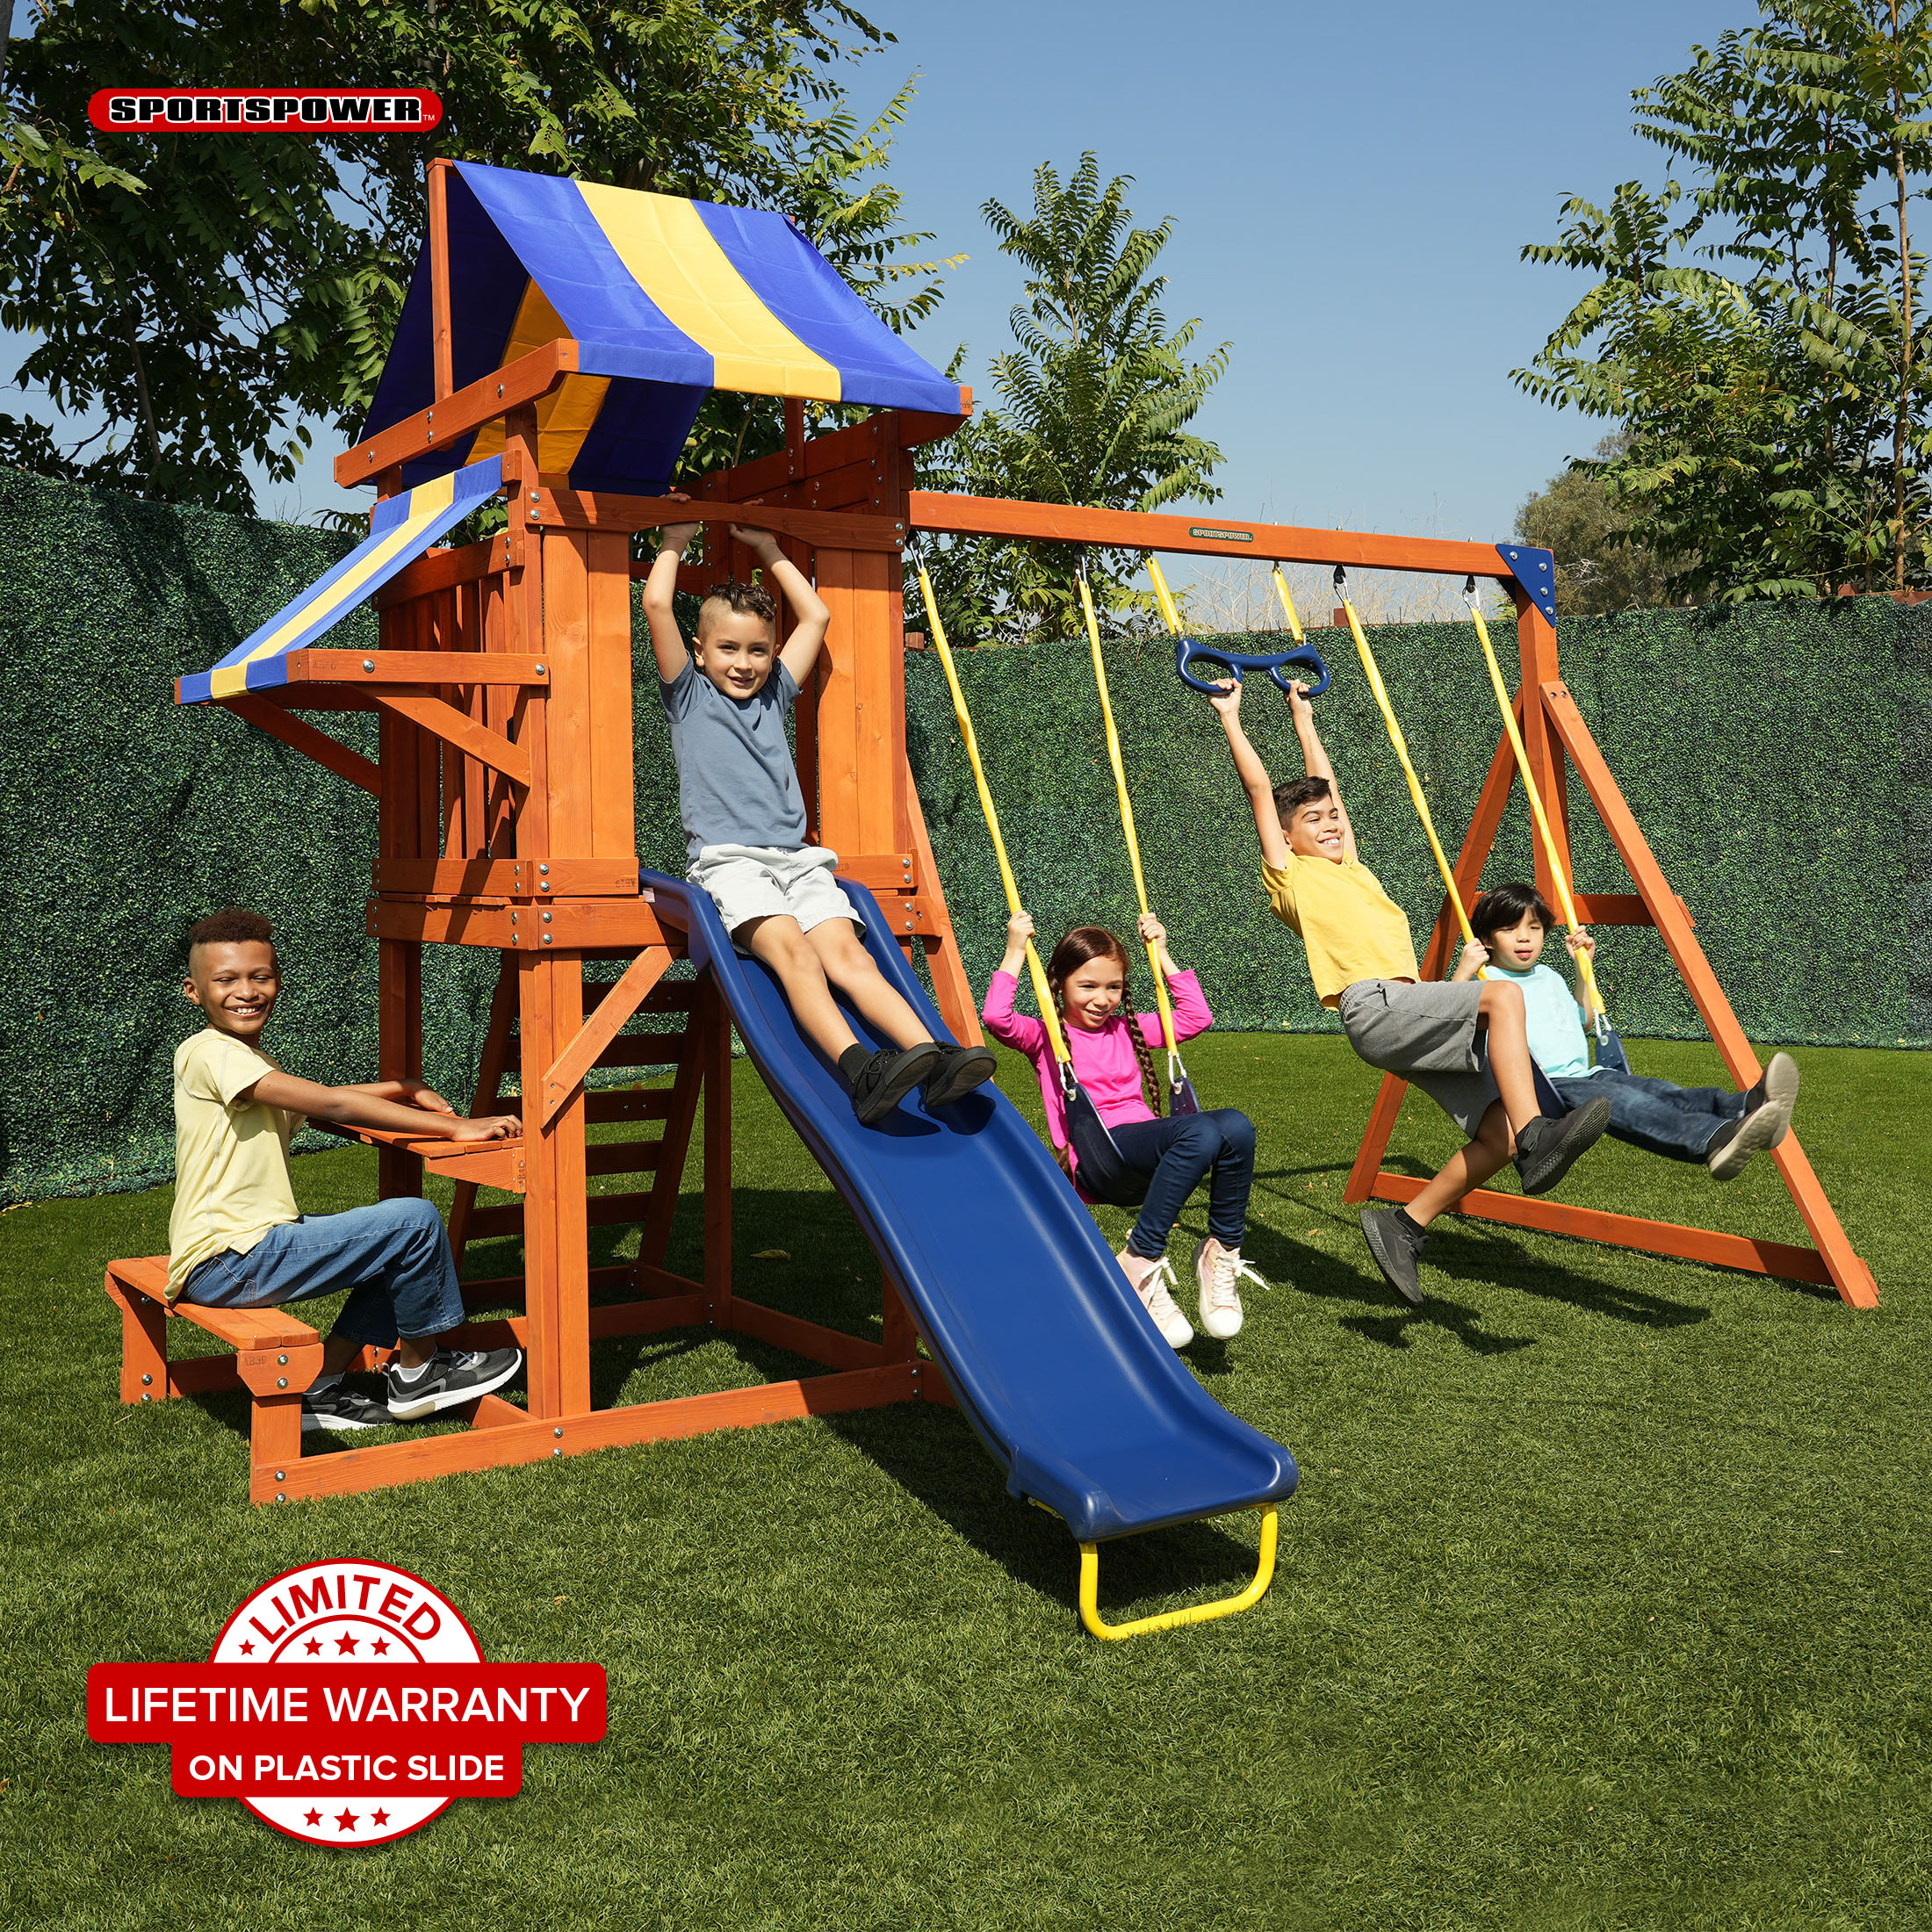 Sportspower Sunnyslope Wooden Swing Set with Play Fort, Trapeze, & 6' Double Wall Slide with Lifetime Warranty - image 1 of 13